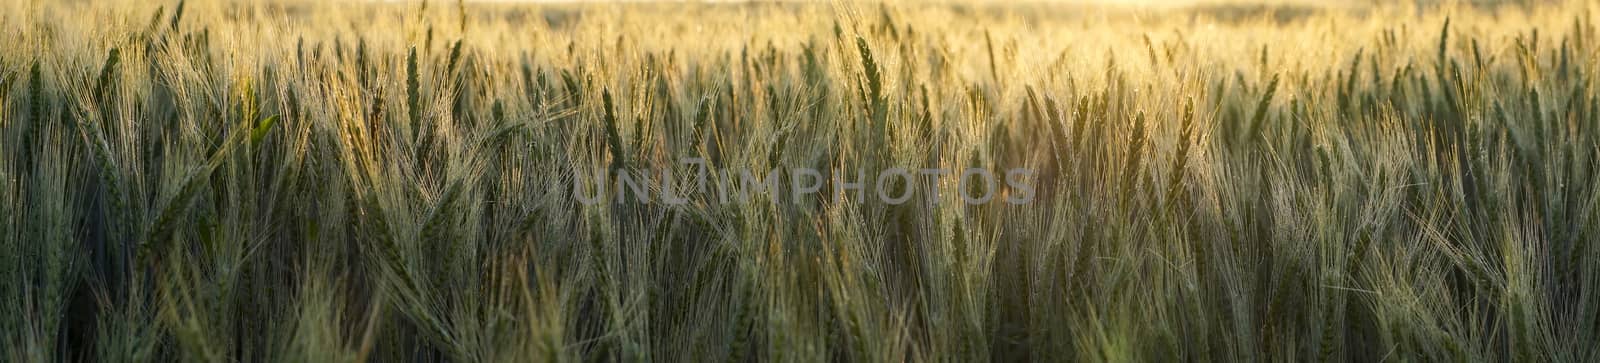 Panorama banner or header of backlit wheat in an agricultural field at sunset with a golden glow over the crop